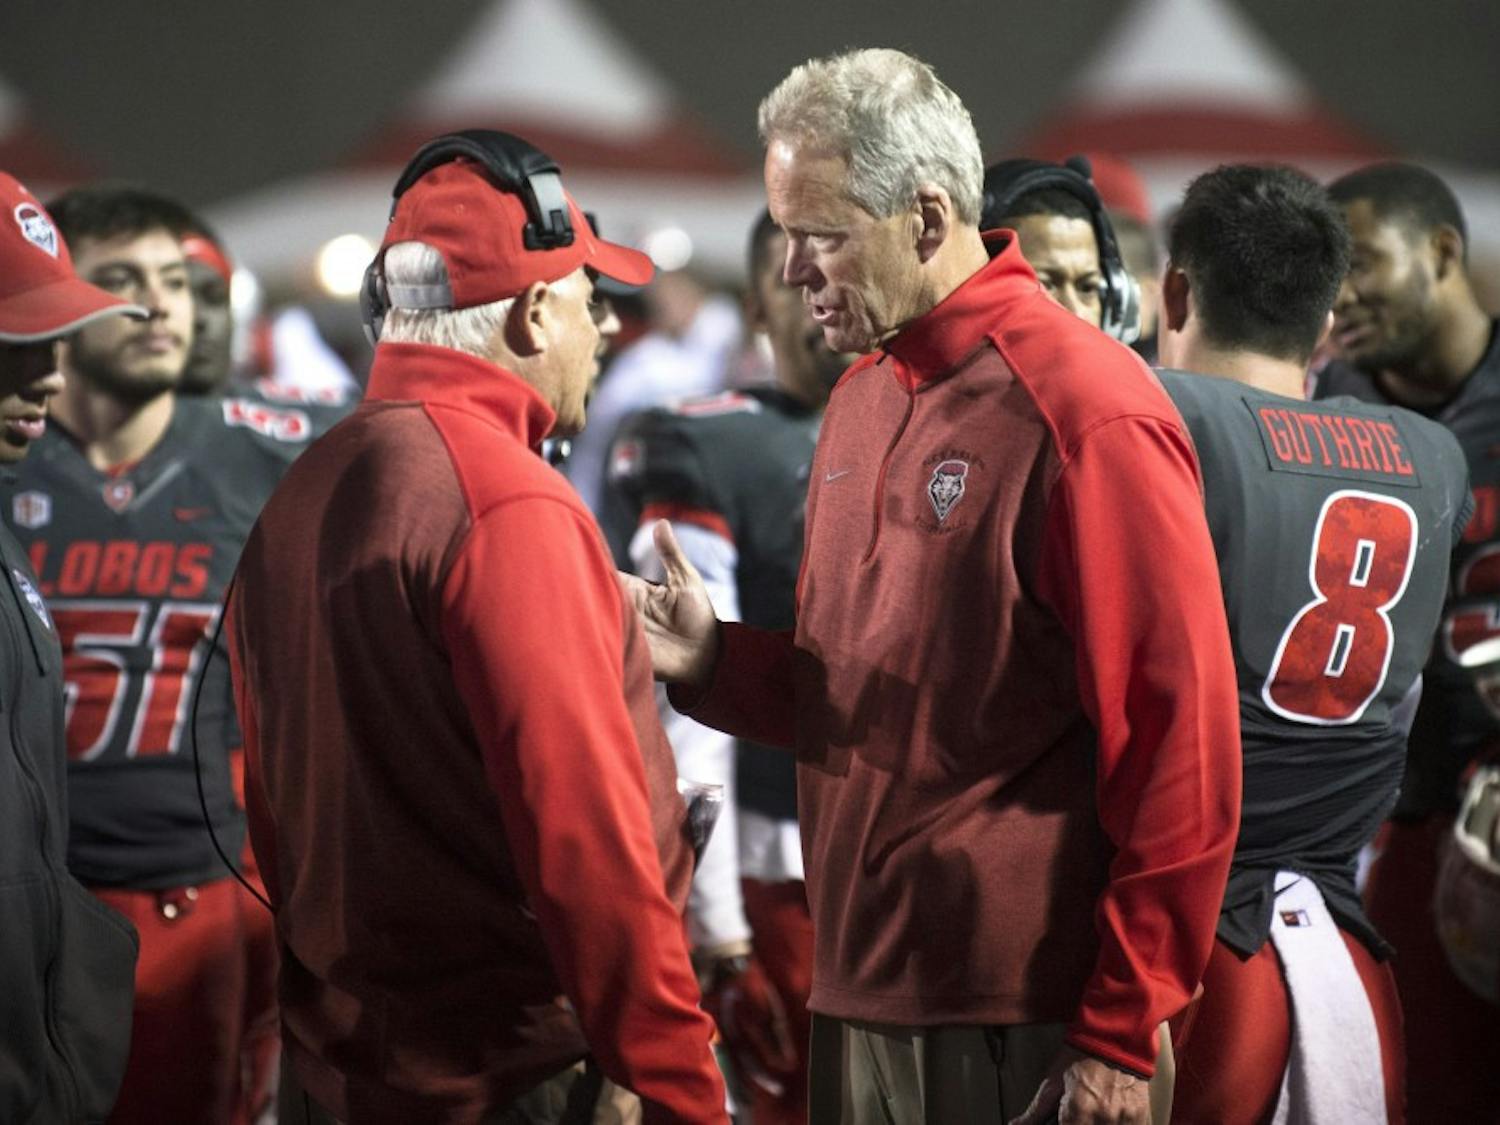 New Mexico head coach Bob Davie, right, speaks with defensive coordinator Kevin Cosgrove during the game against Boise State on Saturday. The Lobos must win its remaining three games in order to be bowl eligible.